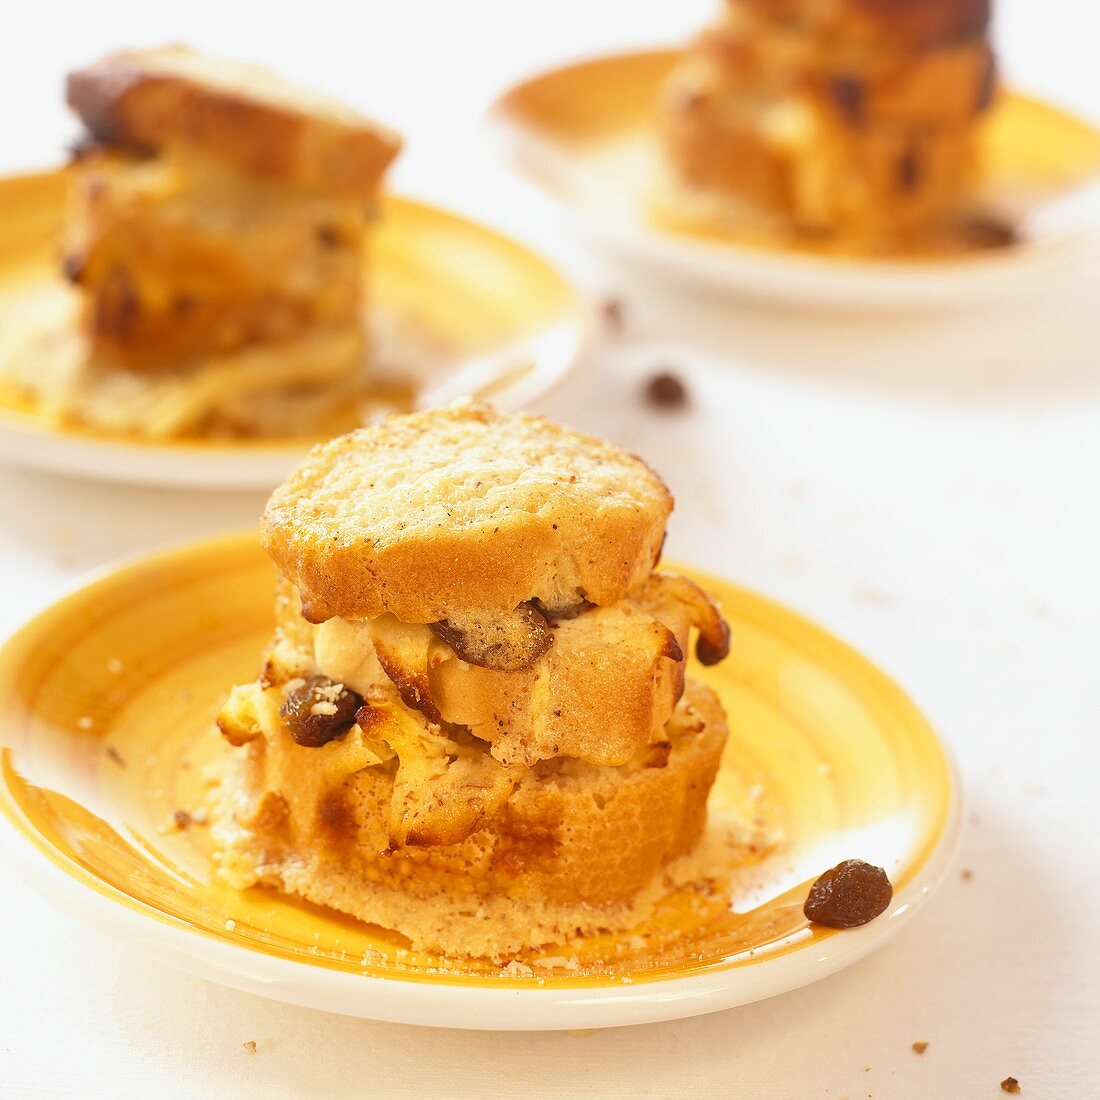 Log pyre (bread pudding) with raisins